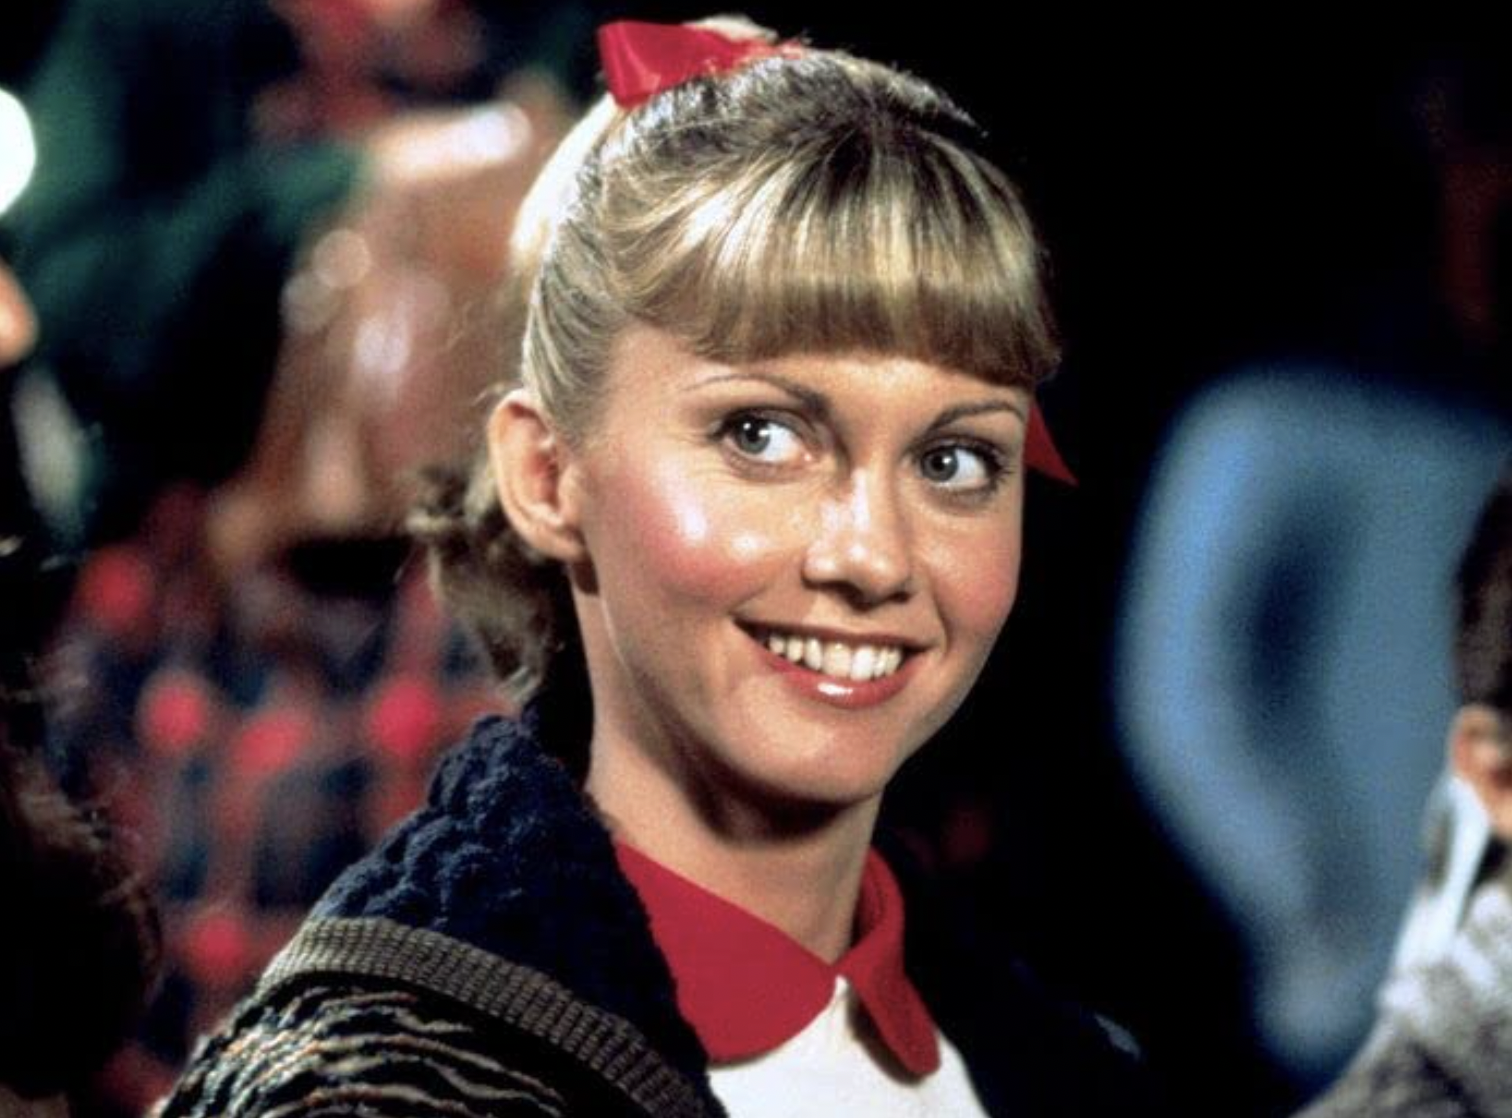 <p>Olivia Newton-John's portrayal of Sandy Olsson in "Grease" is the epitome of teenage innocence and charm, but you might be surprised to learn the actor was 29 at the time of filming.</p>